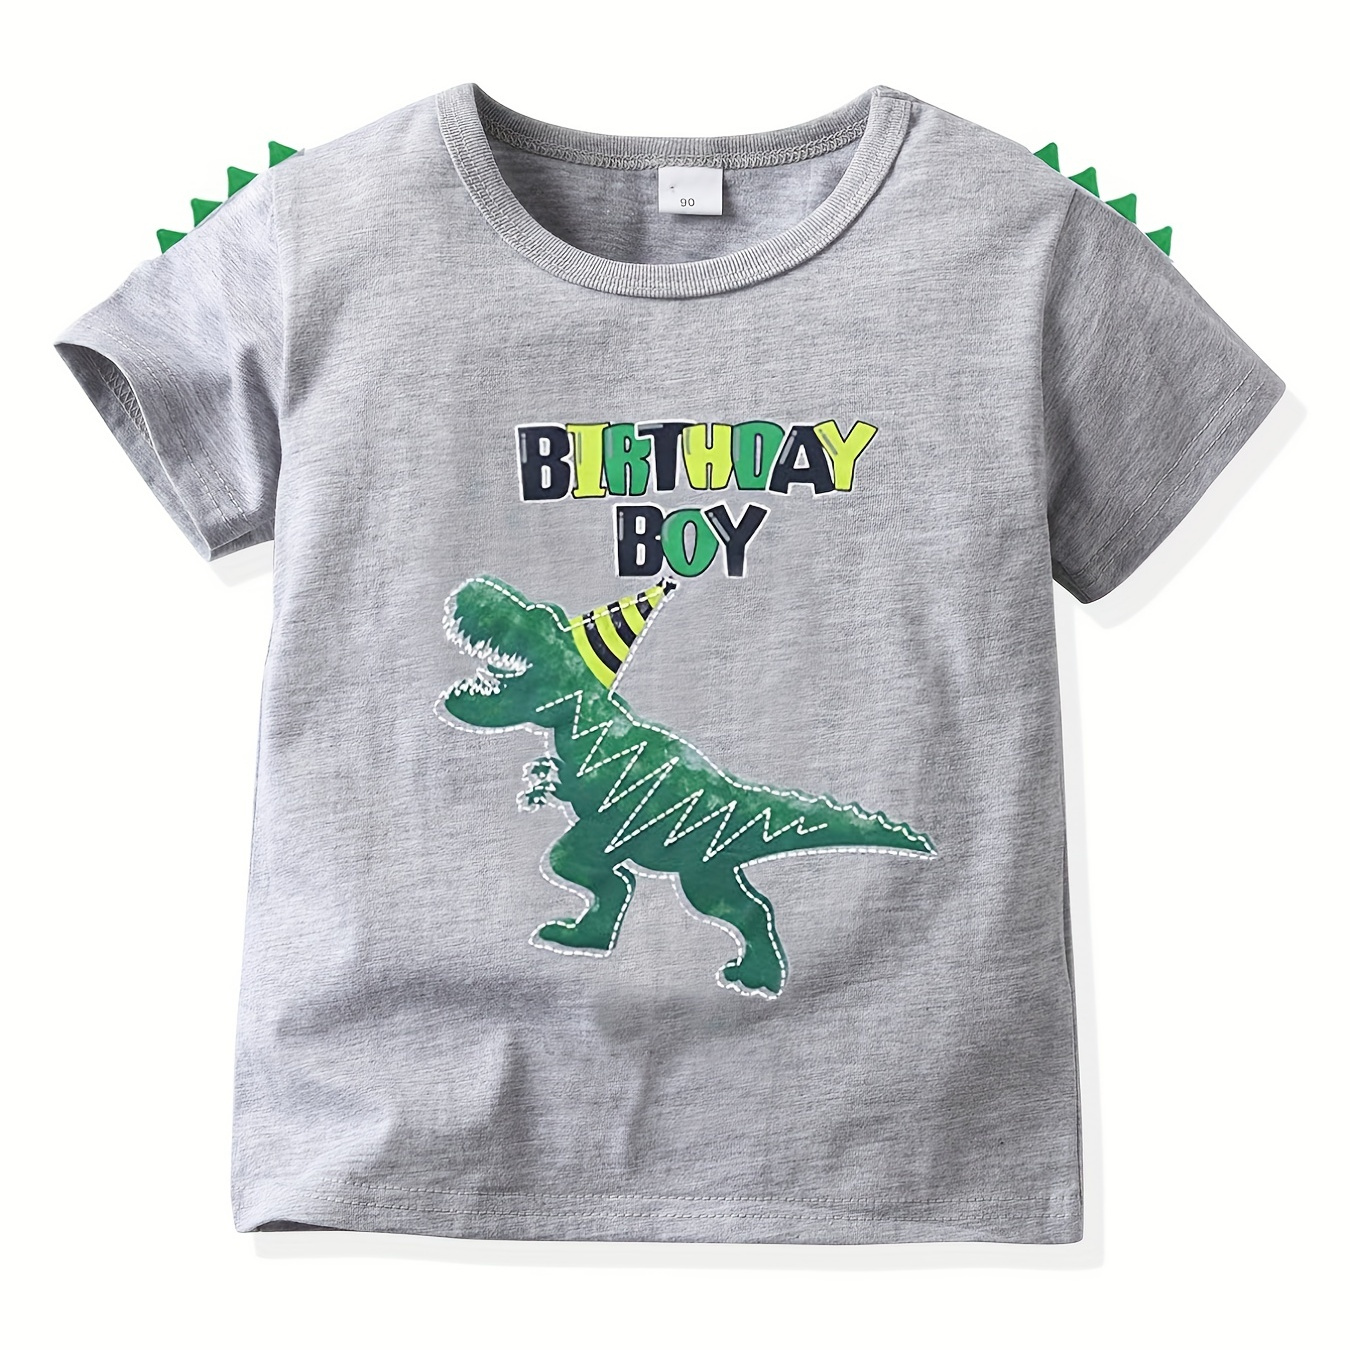 

Boys Casual T-shirt, Birthday T Shirt, Lightweight Comfy Short Sleeve Tops, Cartoon Dinosaur Graphic Tees For Unisex Toddlers Summer, Kids Clothings